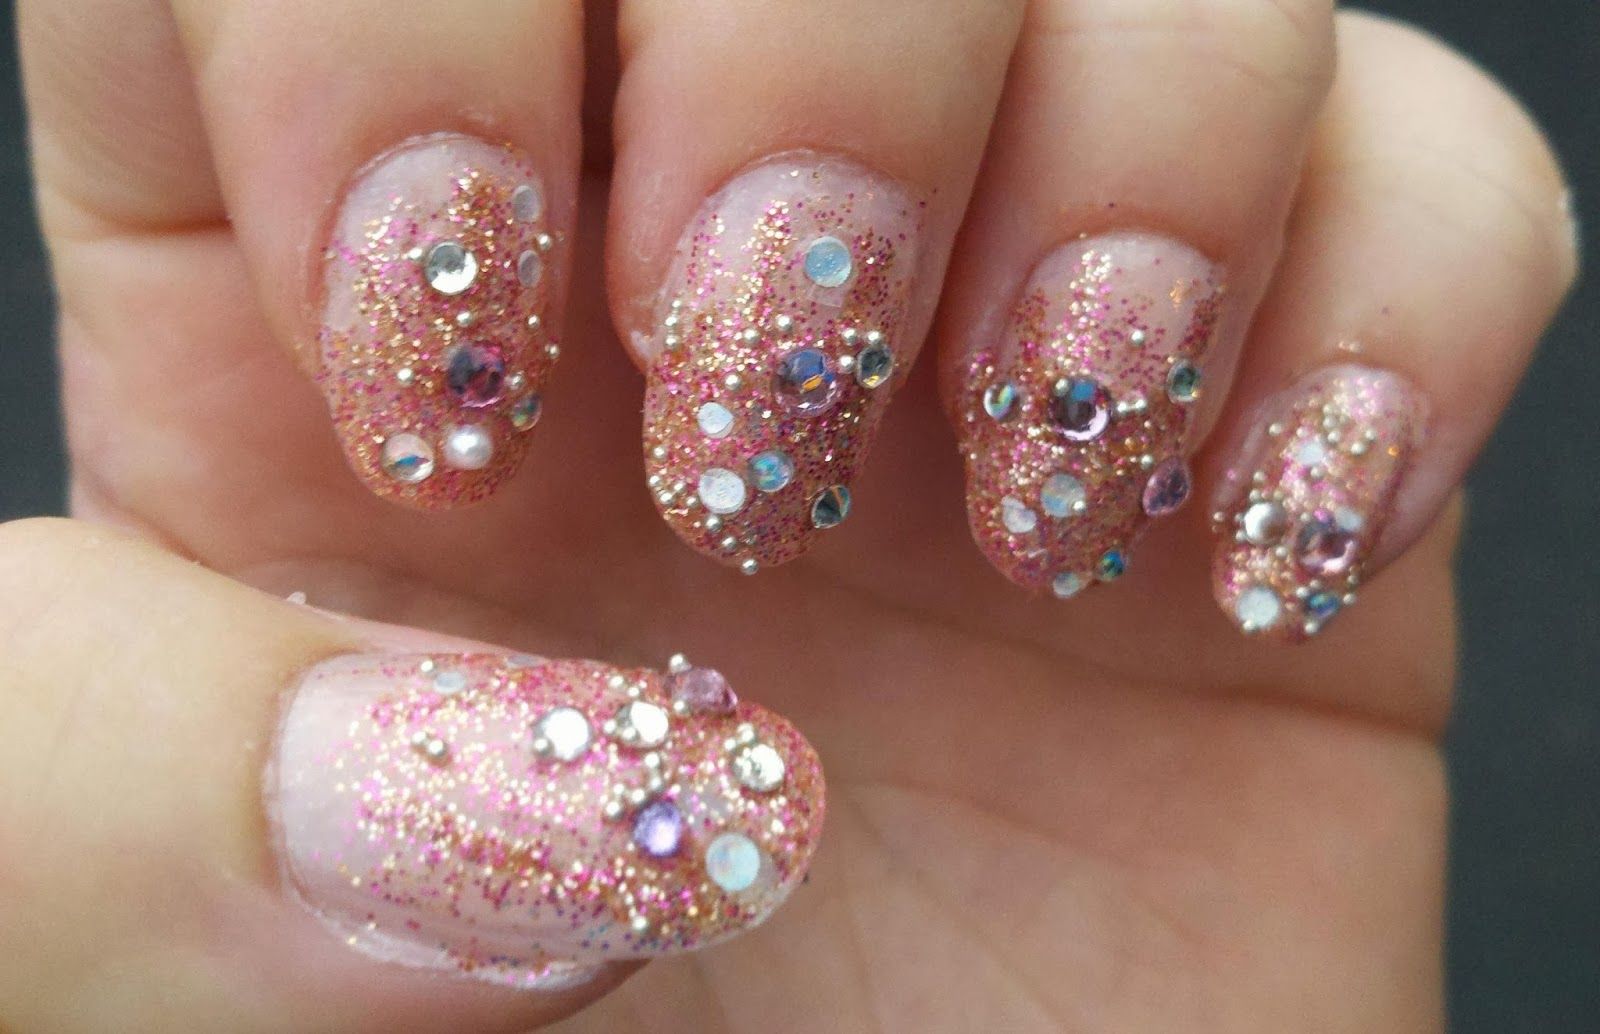 5. Stunning HD Nail Art Images - wide 4